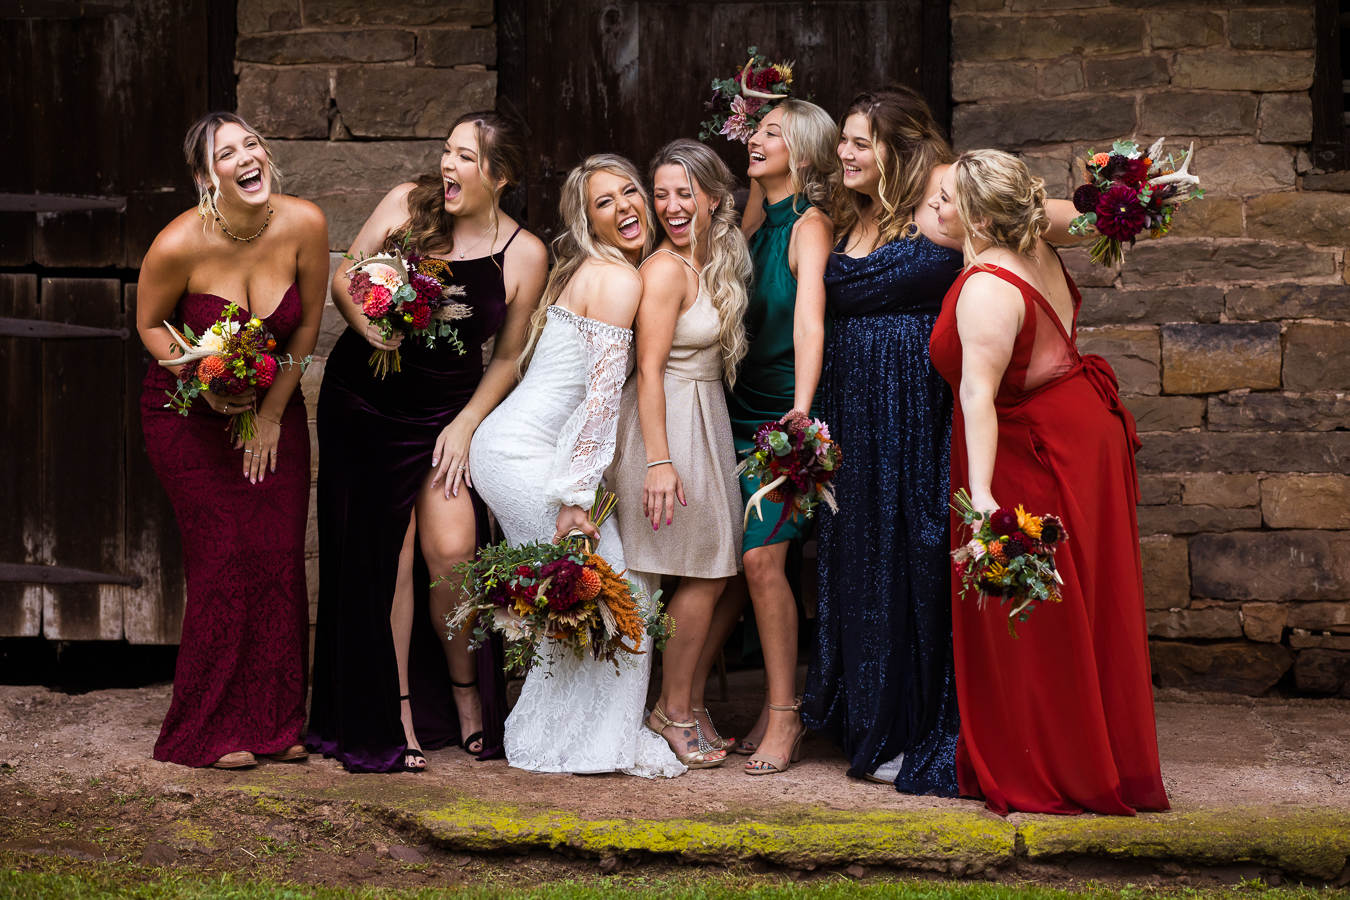 pa country wedding photographer, lisa rhinehart, captures this fun, candid, unique bridal party portrait of the bride with her bridesmaids who are dressed in all different colored and styled dresses holding their vibrant, fall colored bouquets during this country inspired wedding 